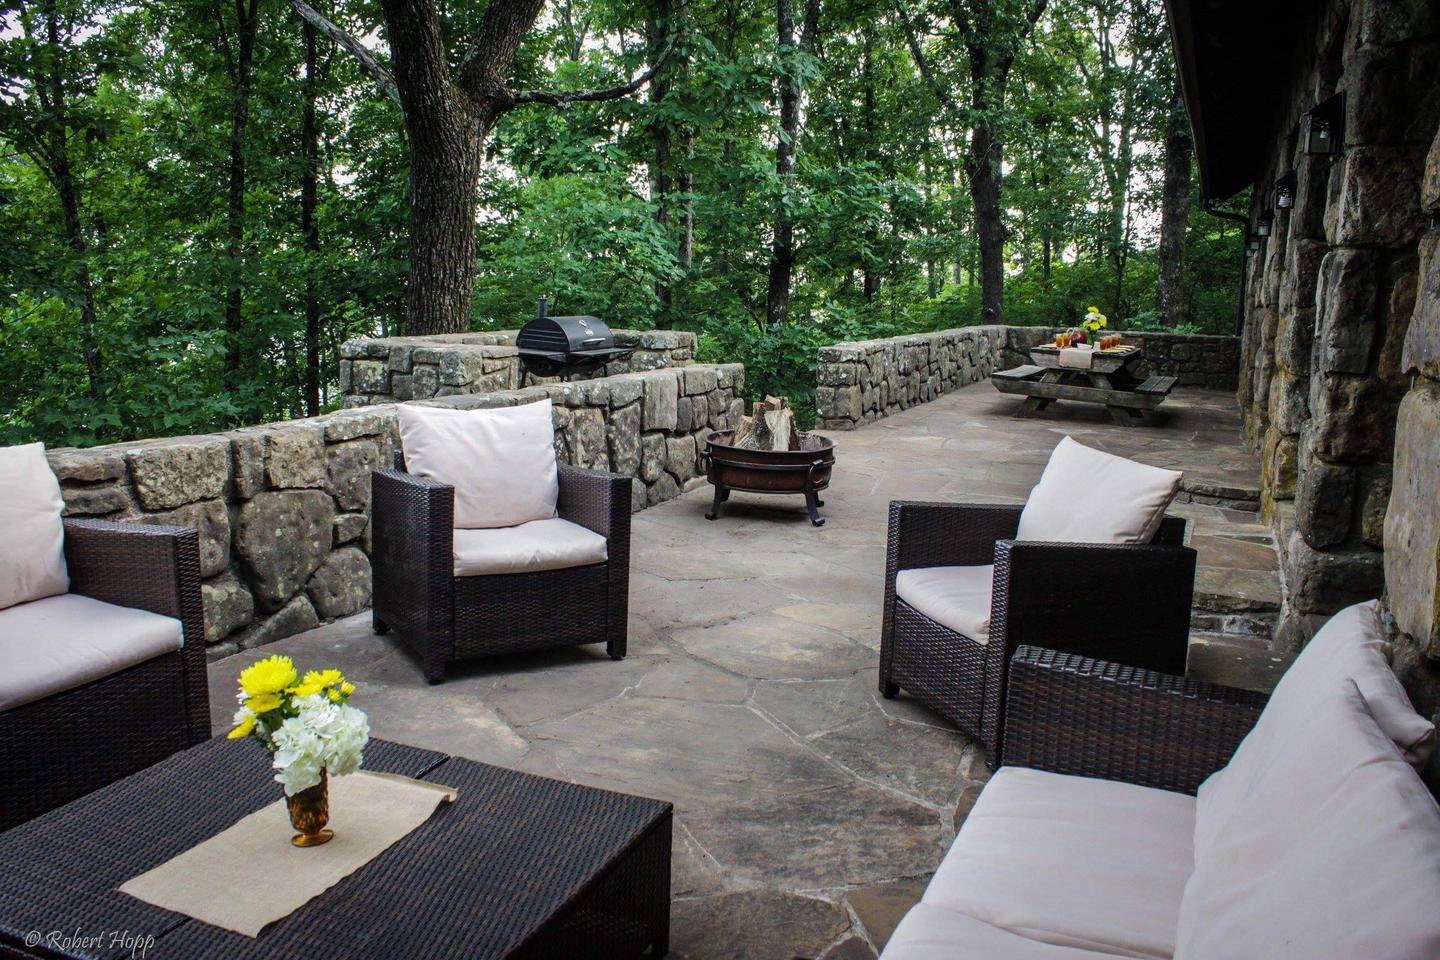 WHITE ROCK MOUNTAIN RECREATION AREA LODGE PATIOWhite Rock Mountain Lodge Patio with seating for 16, a large BBQ grill, and SPECTACULAR views! Perfect setting for family and friends gatherings, weddings, reunions, or just a quiet couples retreat.